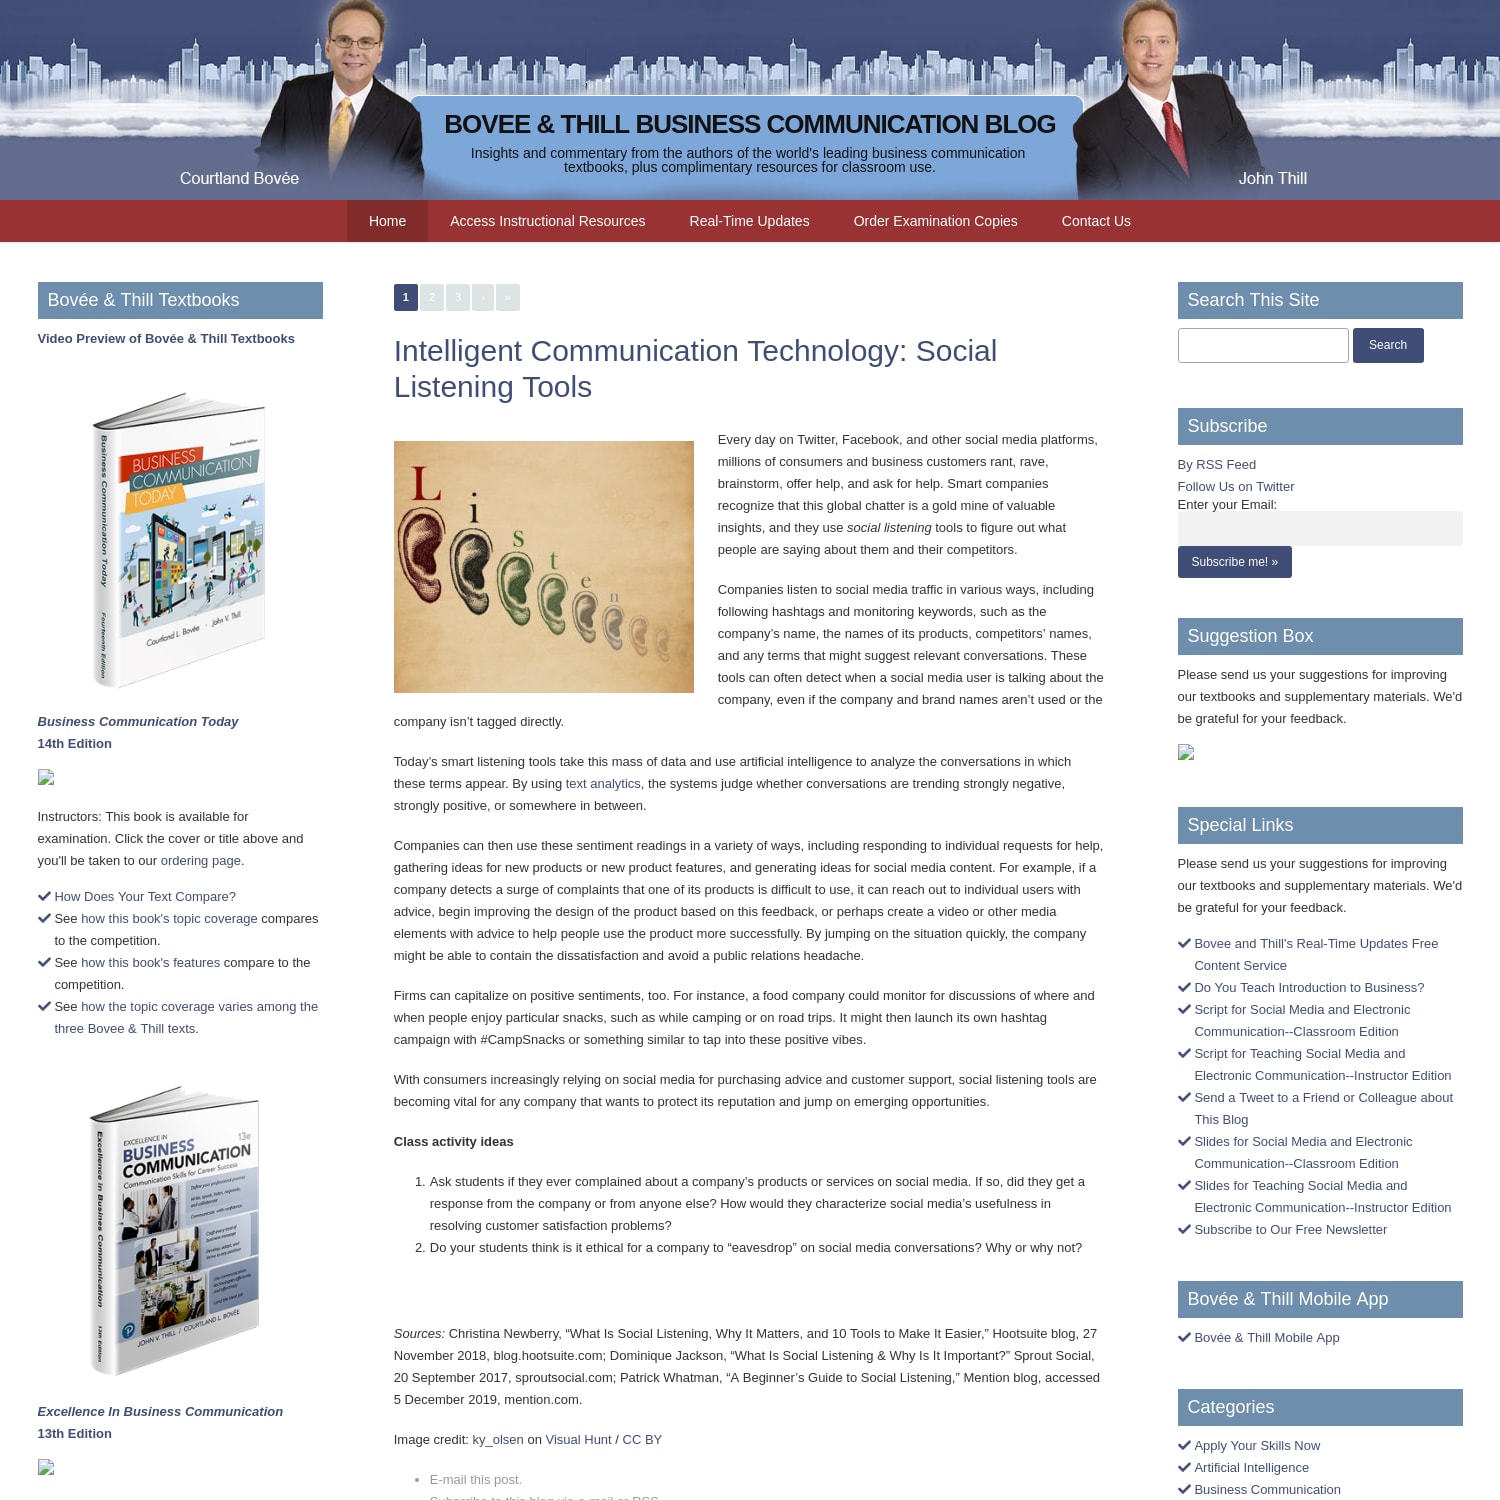 Bovee & Thill Business Communication Blog - Insights and commentary from the authors of the world's leading business communication textbooks, plus complimentary resources for classroom use.